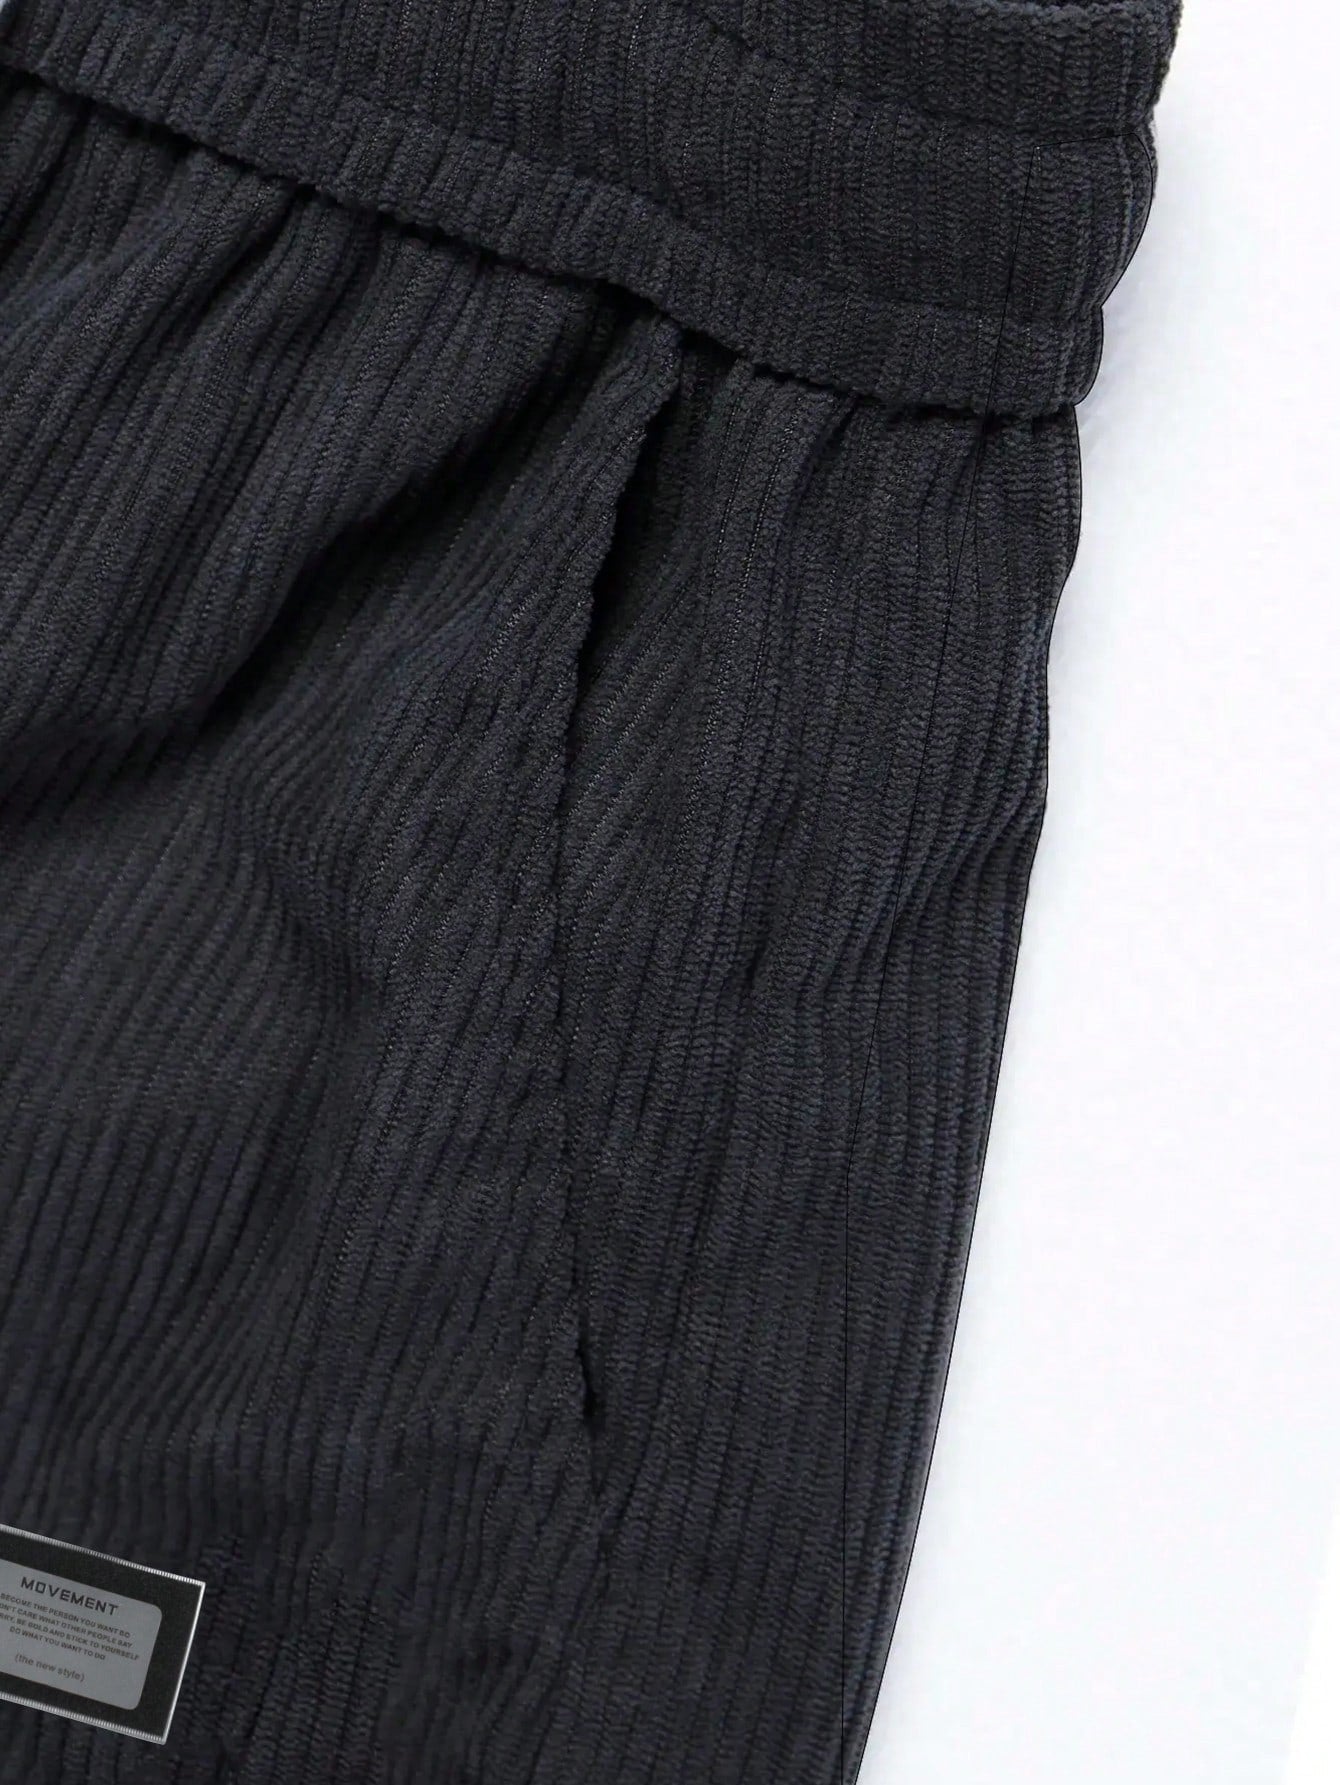 Men'S Corduroy Straight-Leg Pants For Autumn And Winter, Loose & Versatile Casual Trousers